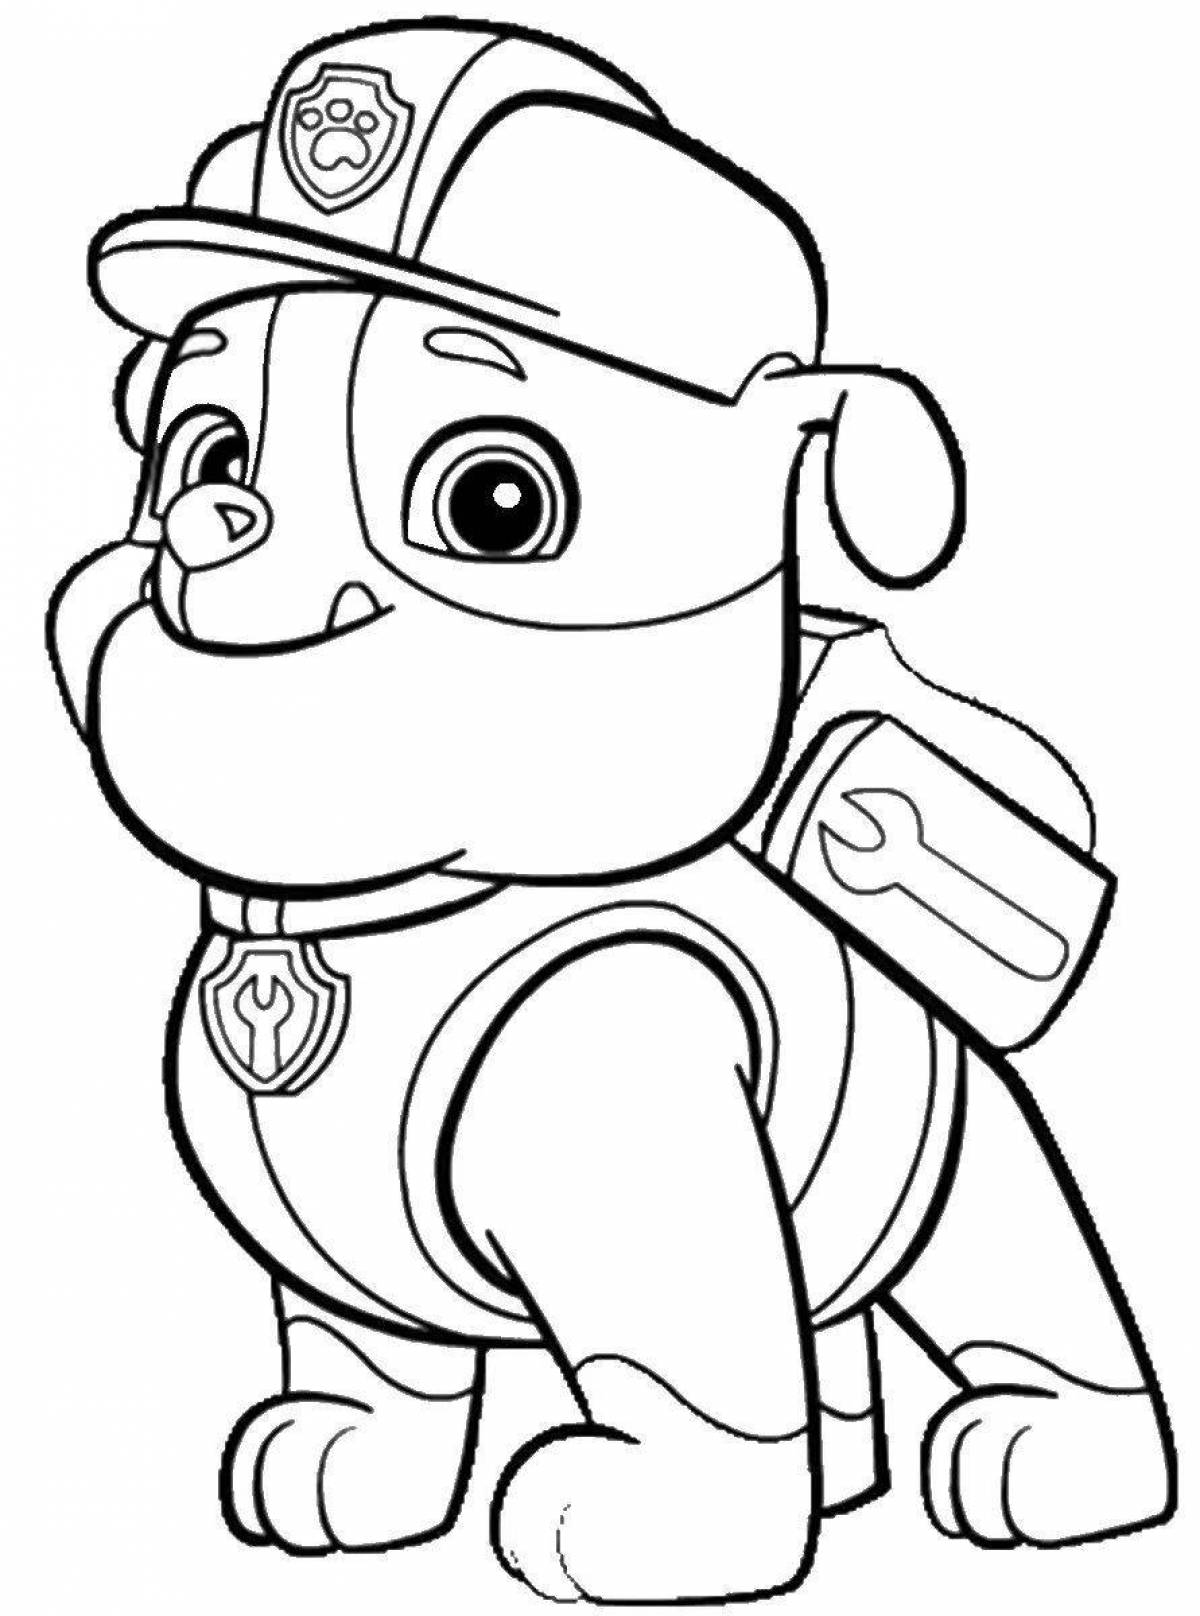 Colour-bright paw patrol coloring book for children 5 years old